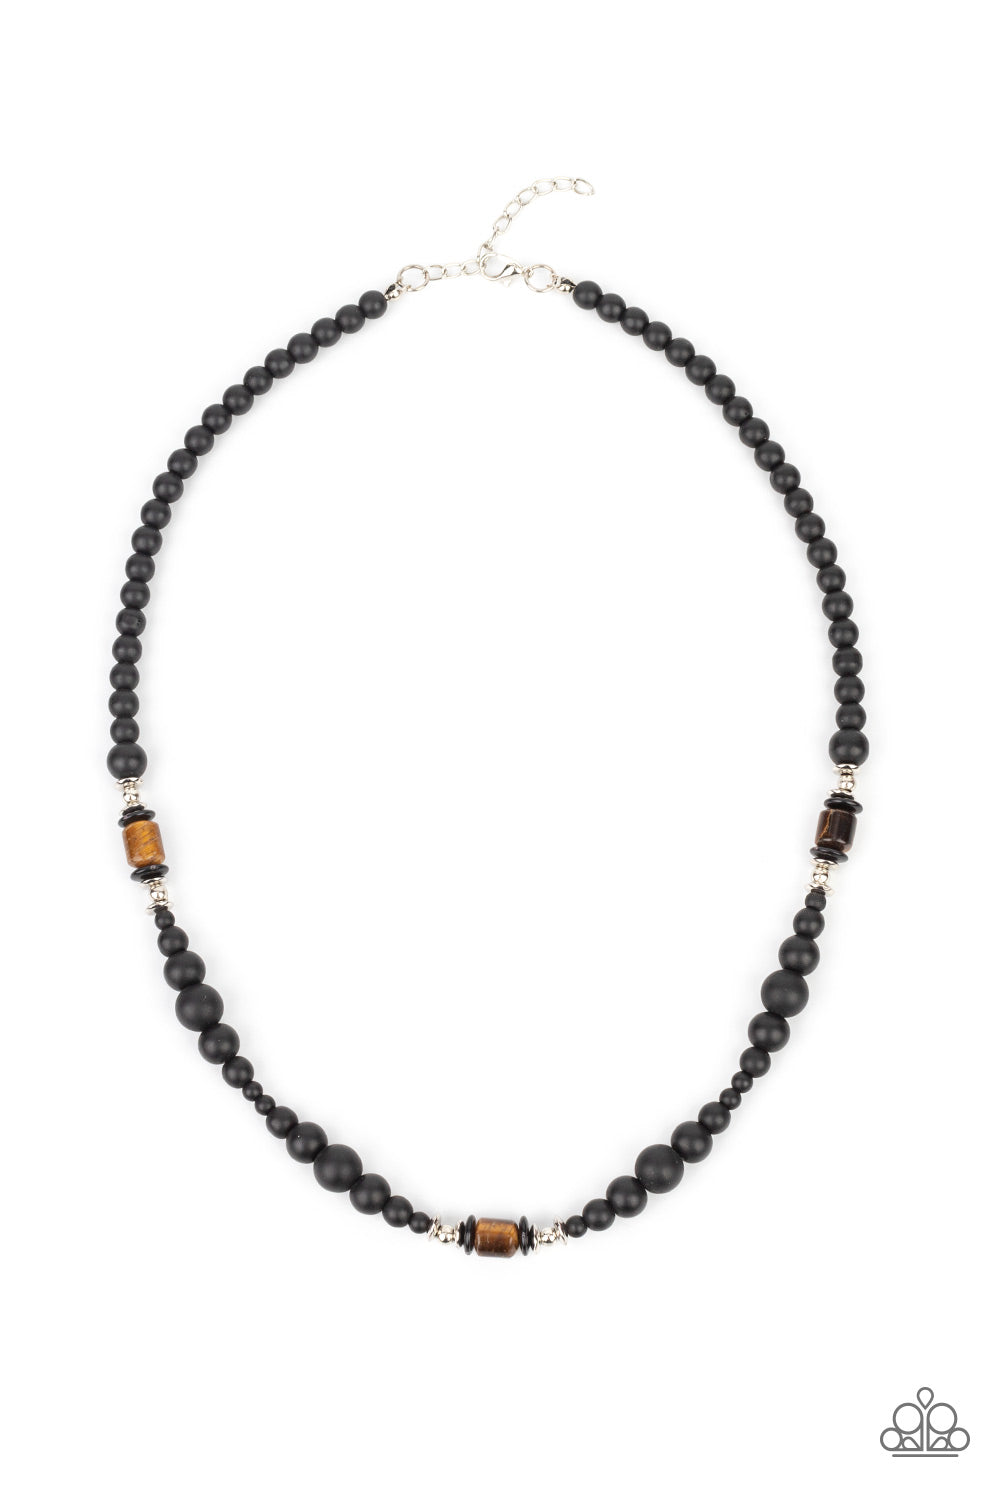 Paparazzi Accessories - Stone Synchrony #N675 - Brown Urban/Men Necklace